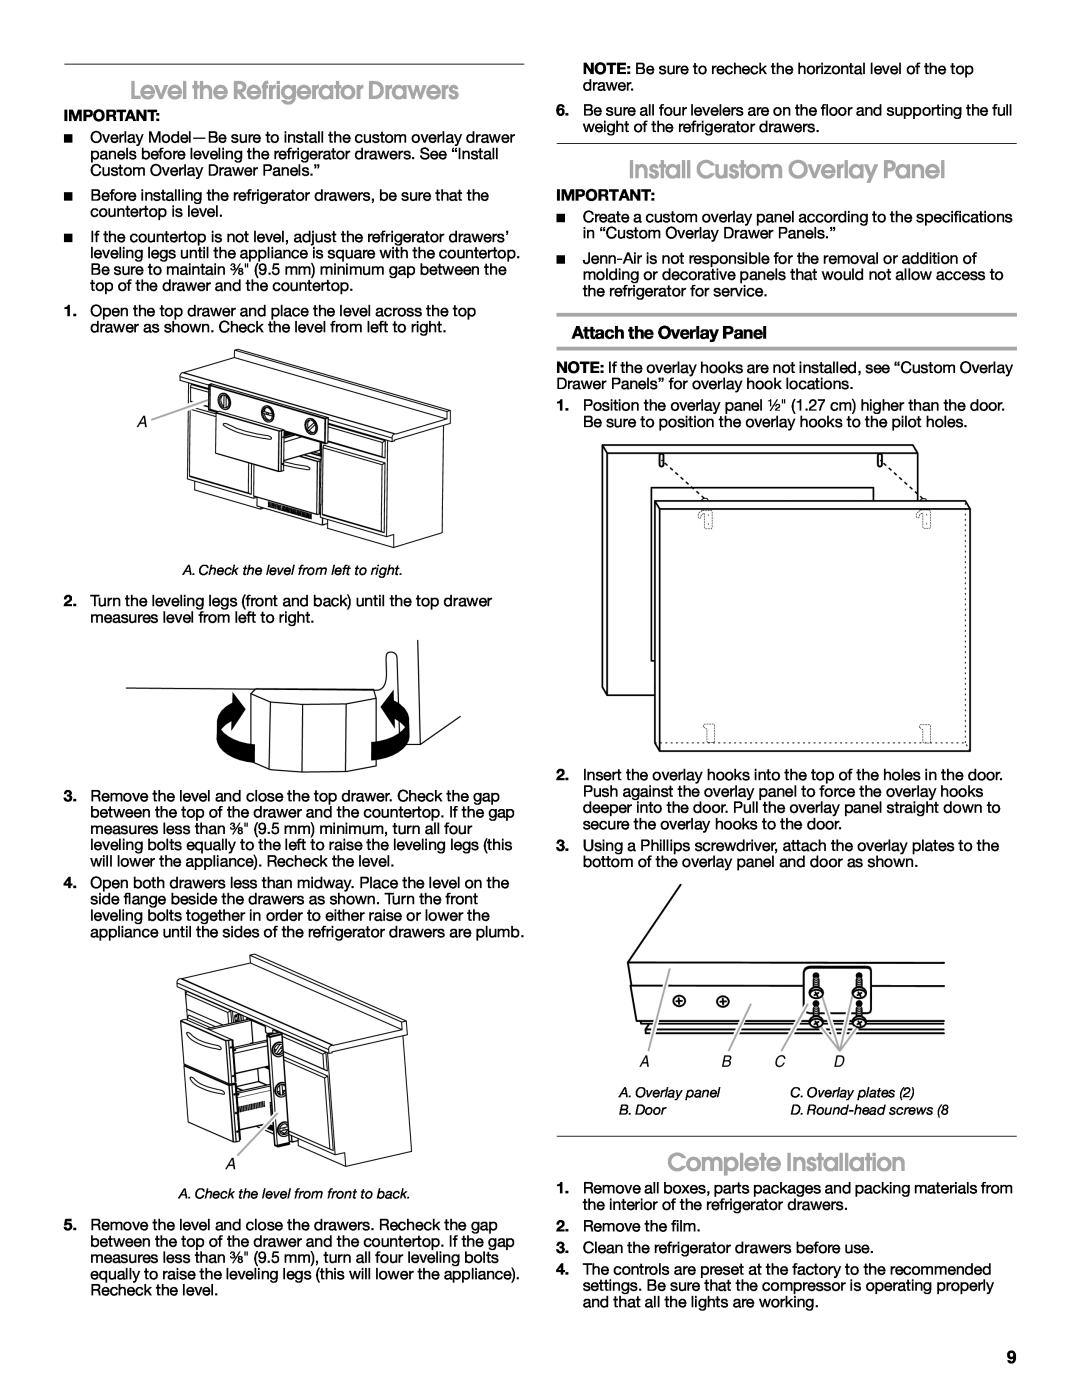 Jenn-Air W10310149A manual Level the Refrigerator Drawers, Install Custom Overlay Panel, Complete Installation 